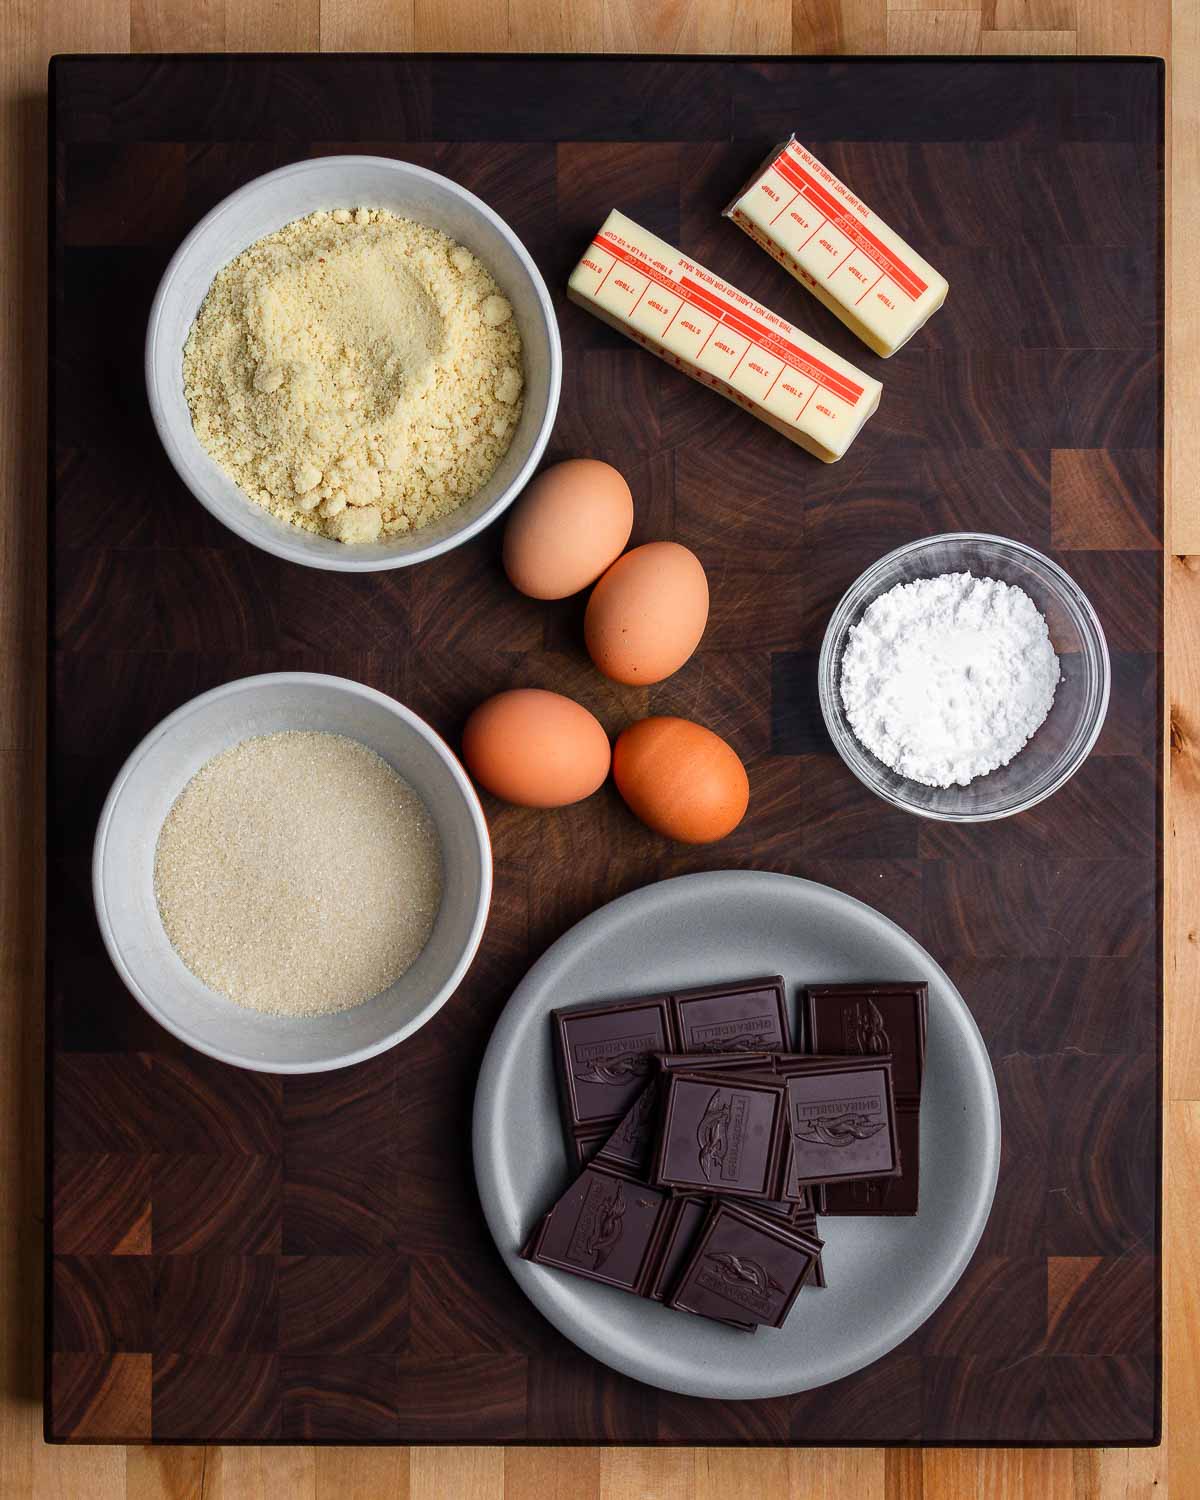 Ingredients shown: almond flour, butter, eggs, sugar, confectioner's sugar, and 70% cacao chocolate.